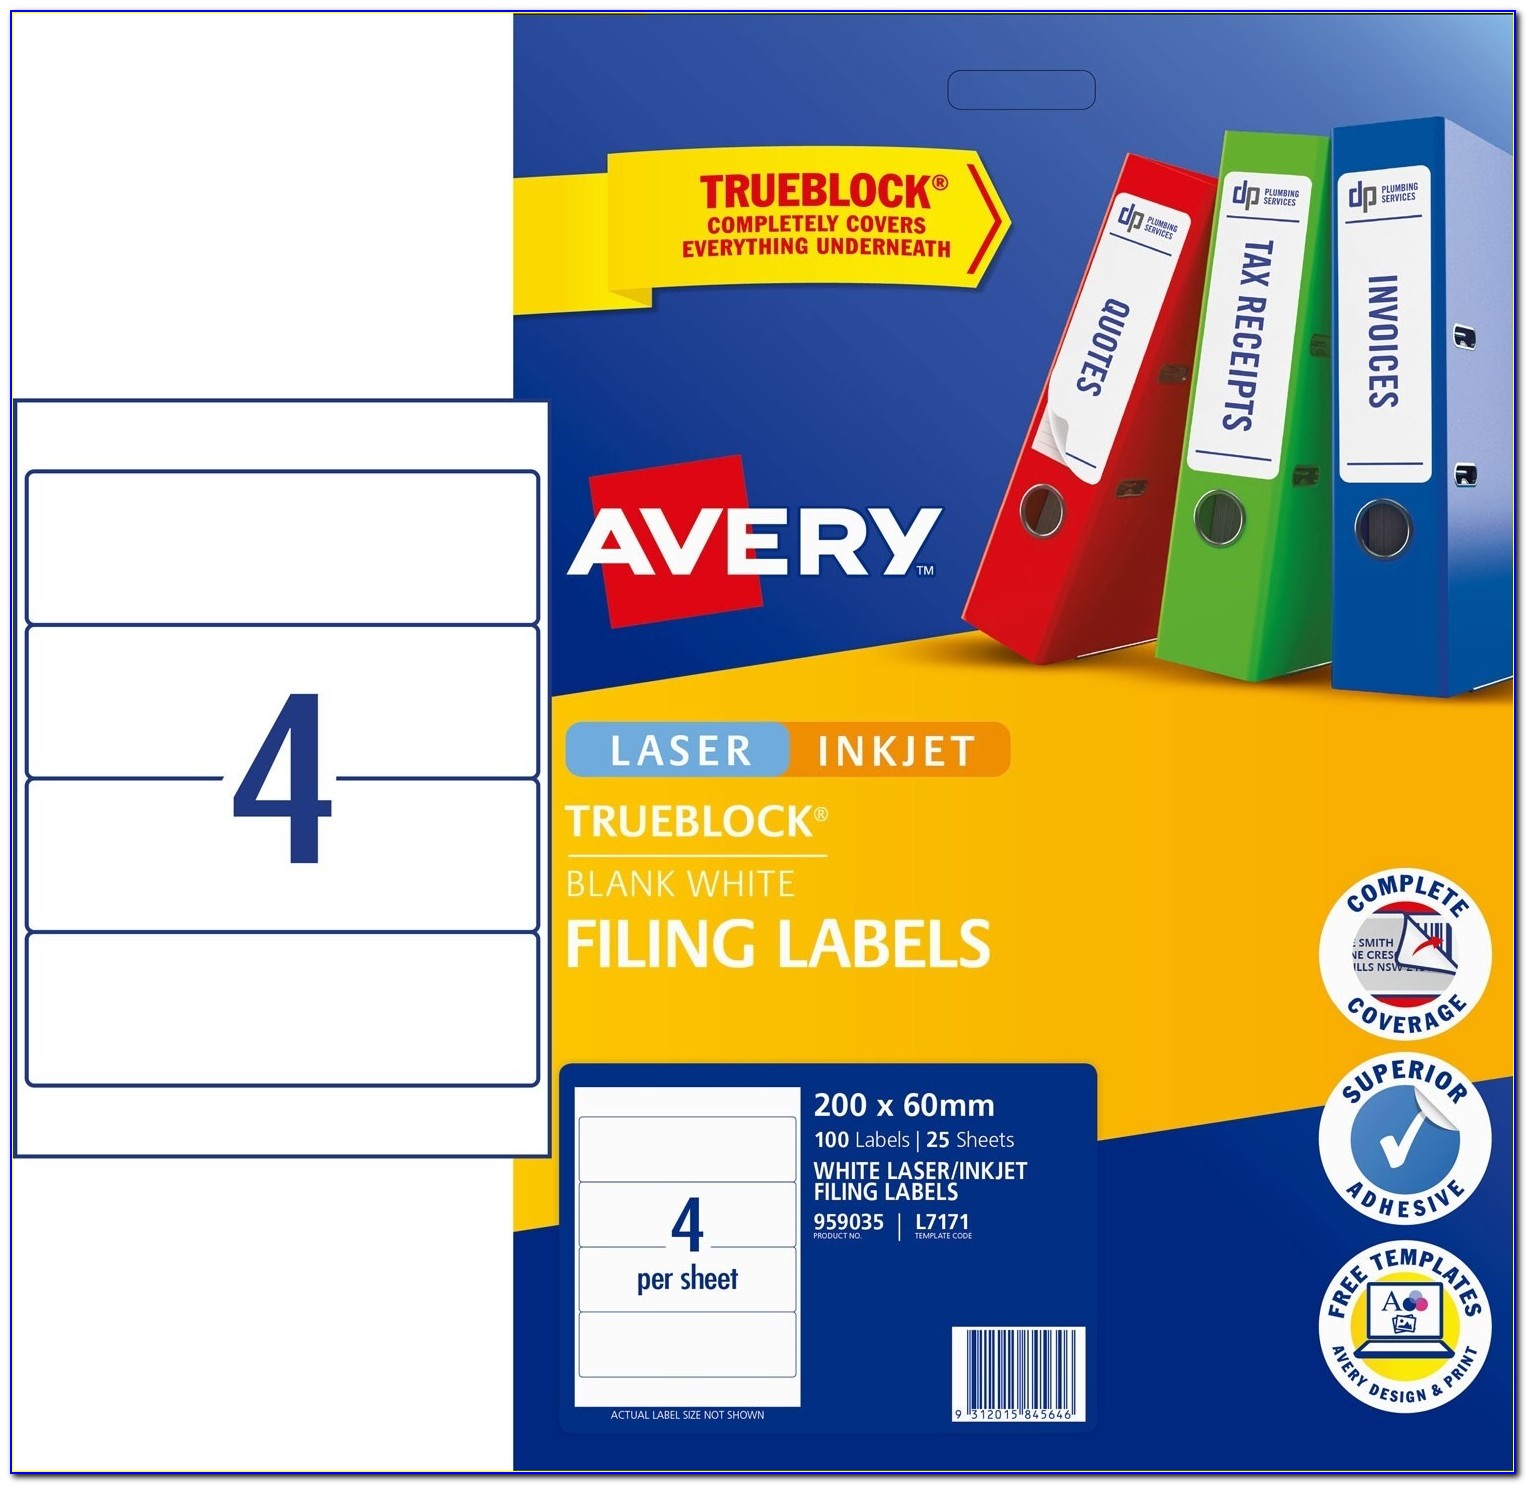 avery-filing-labels-template-5766